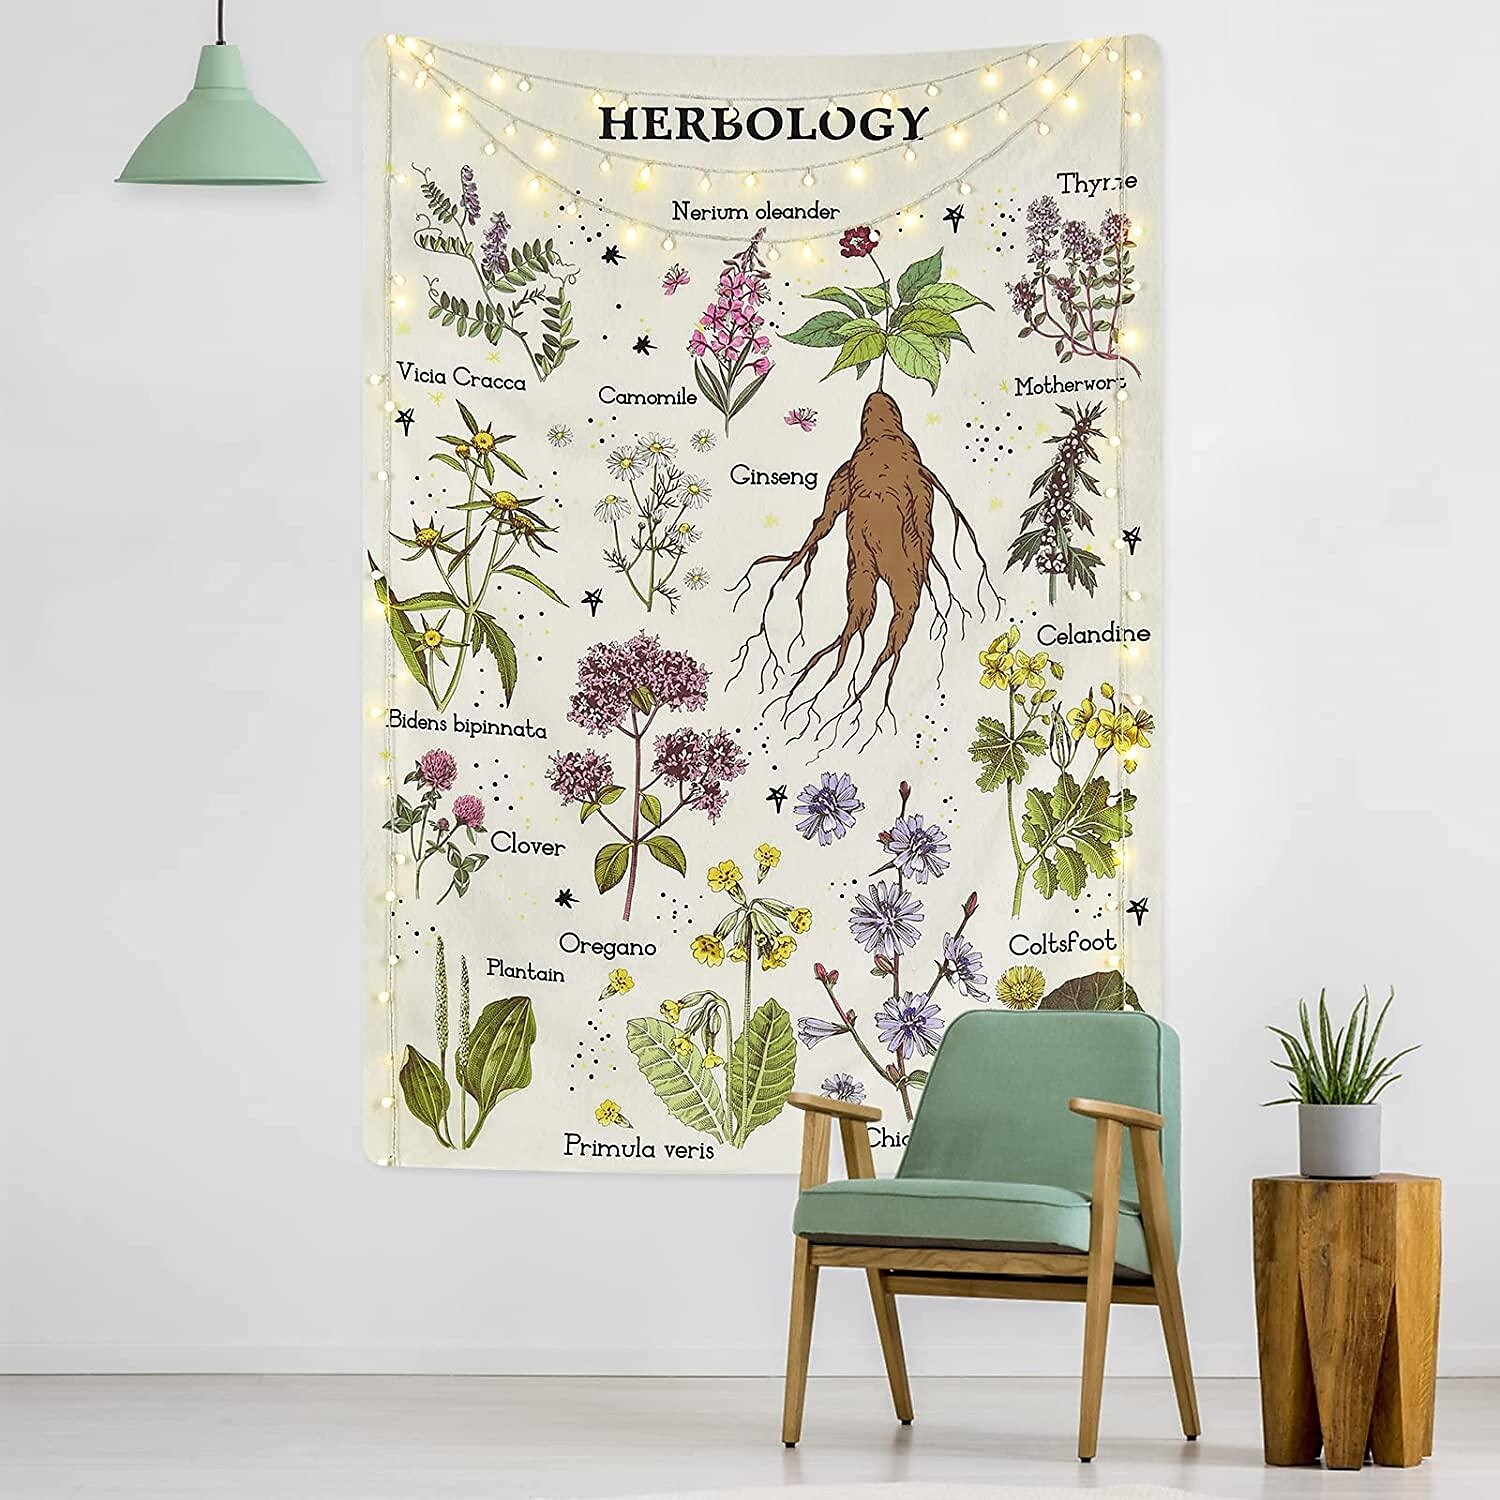 Plant Herbs Wall Tapestry Art Decor Floral Vintage Wall Hanging